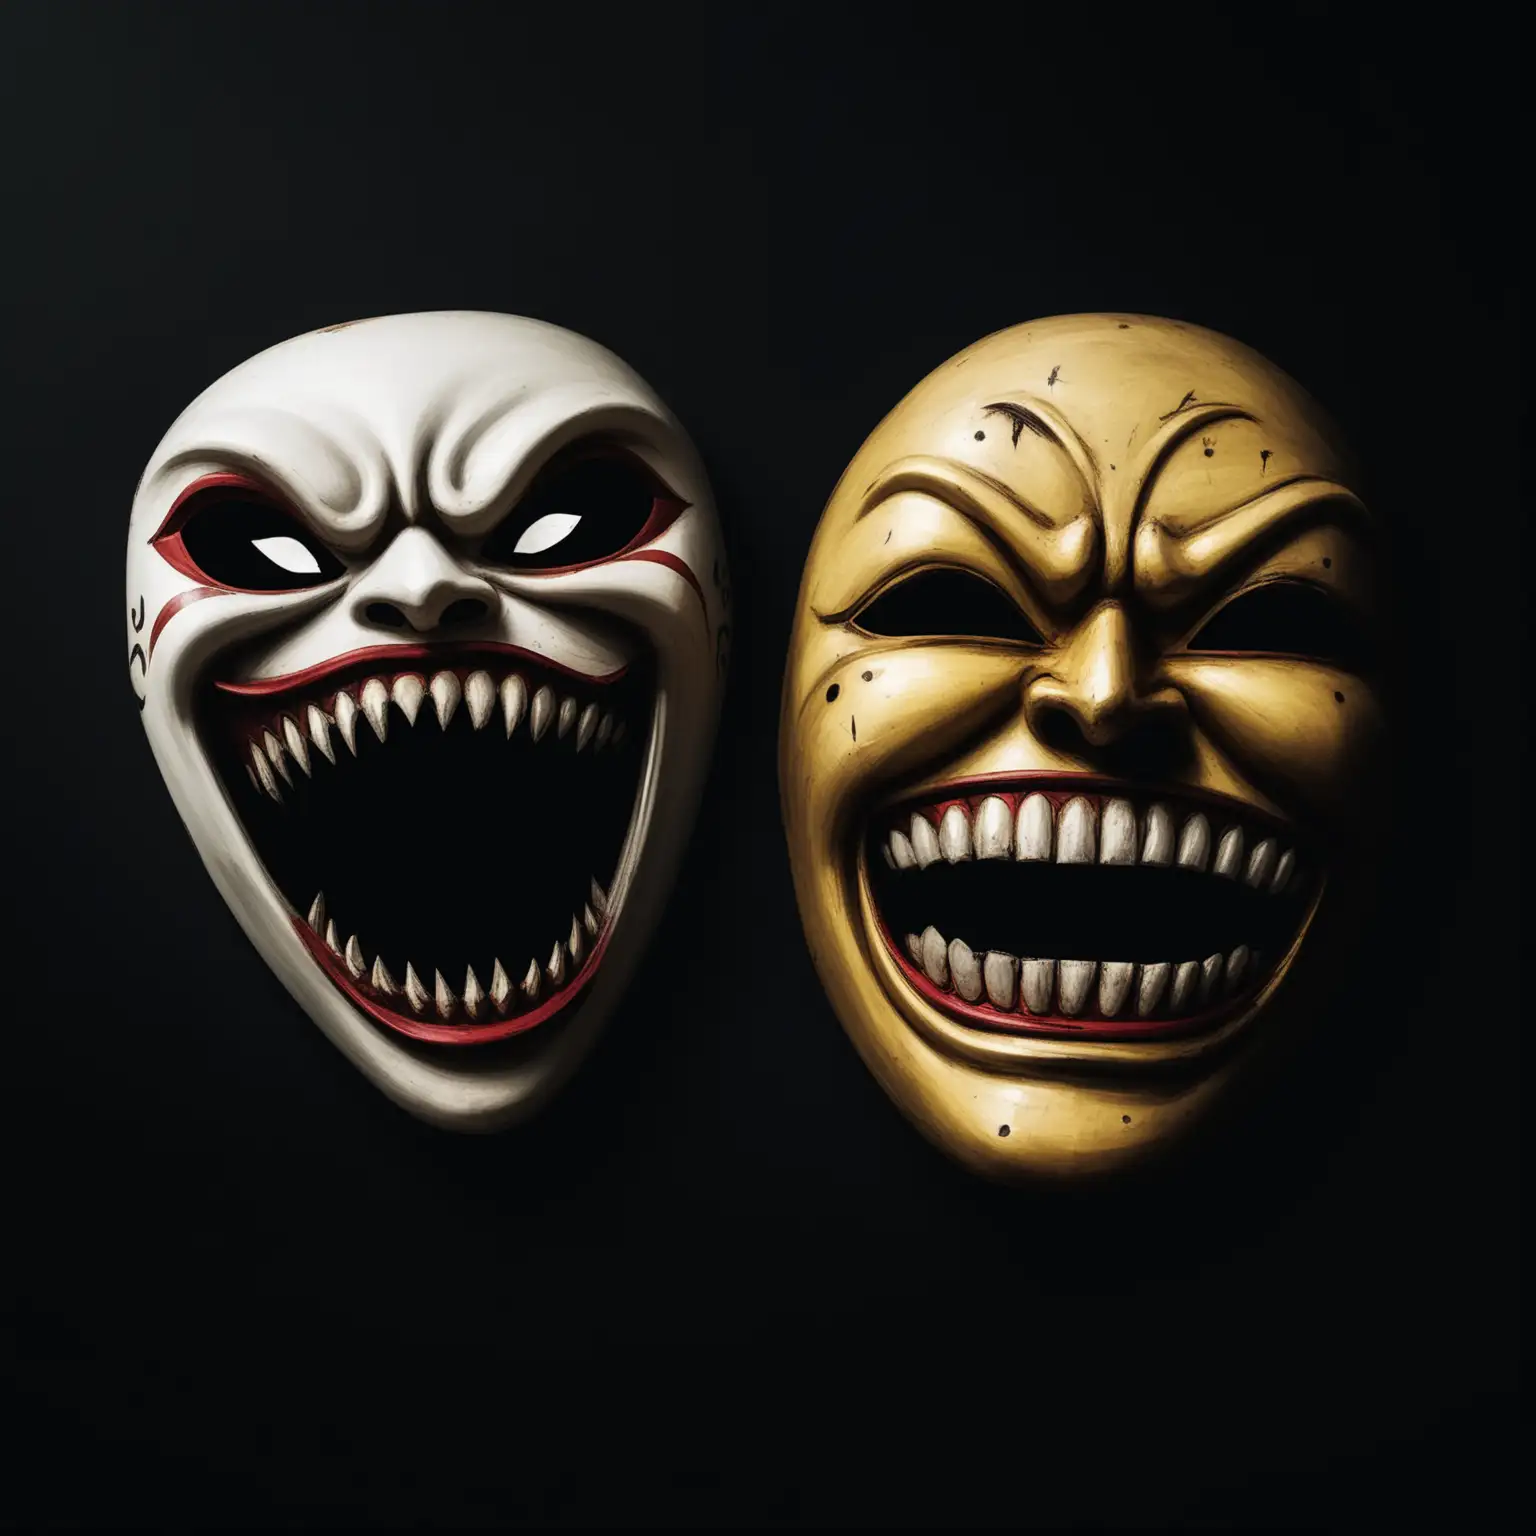 Contrasting Happy and Angry Masks on Black Background